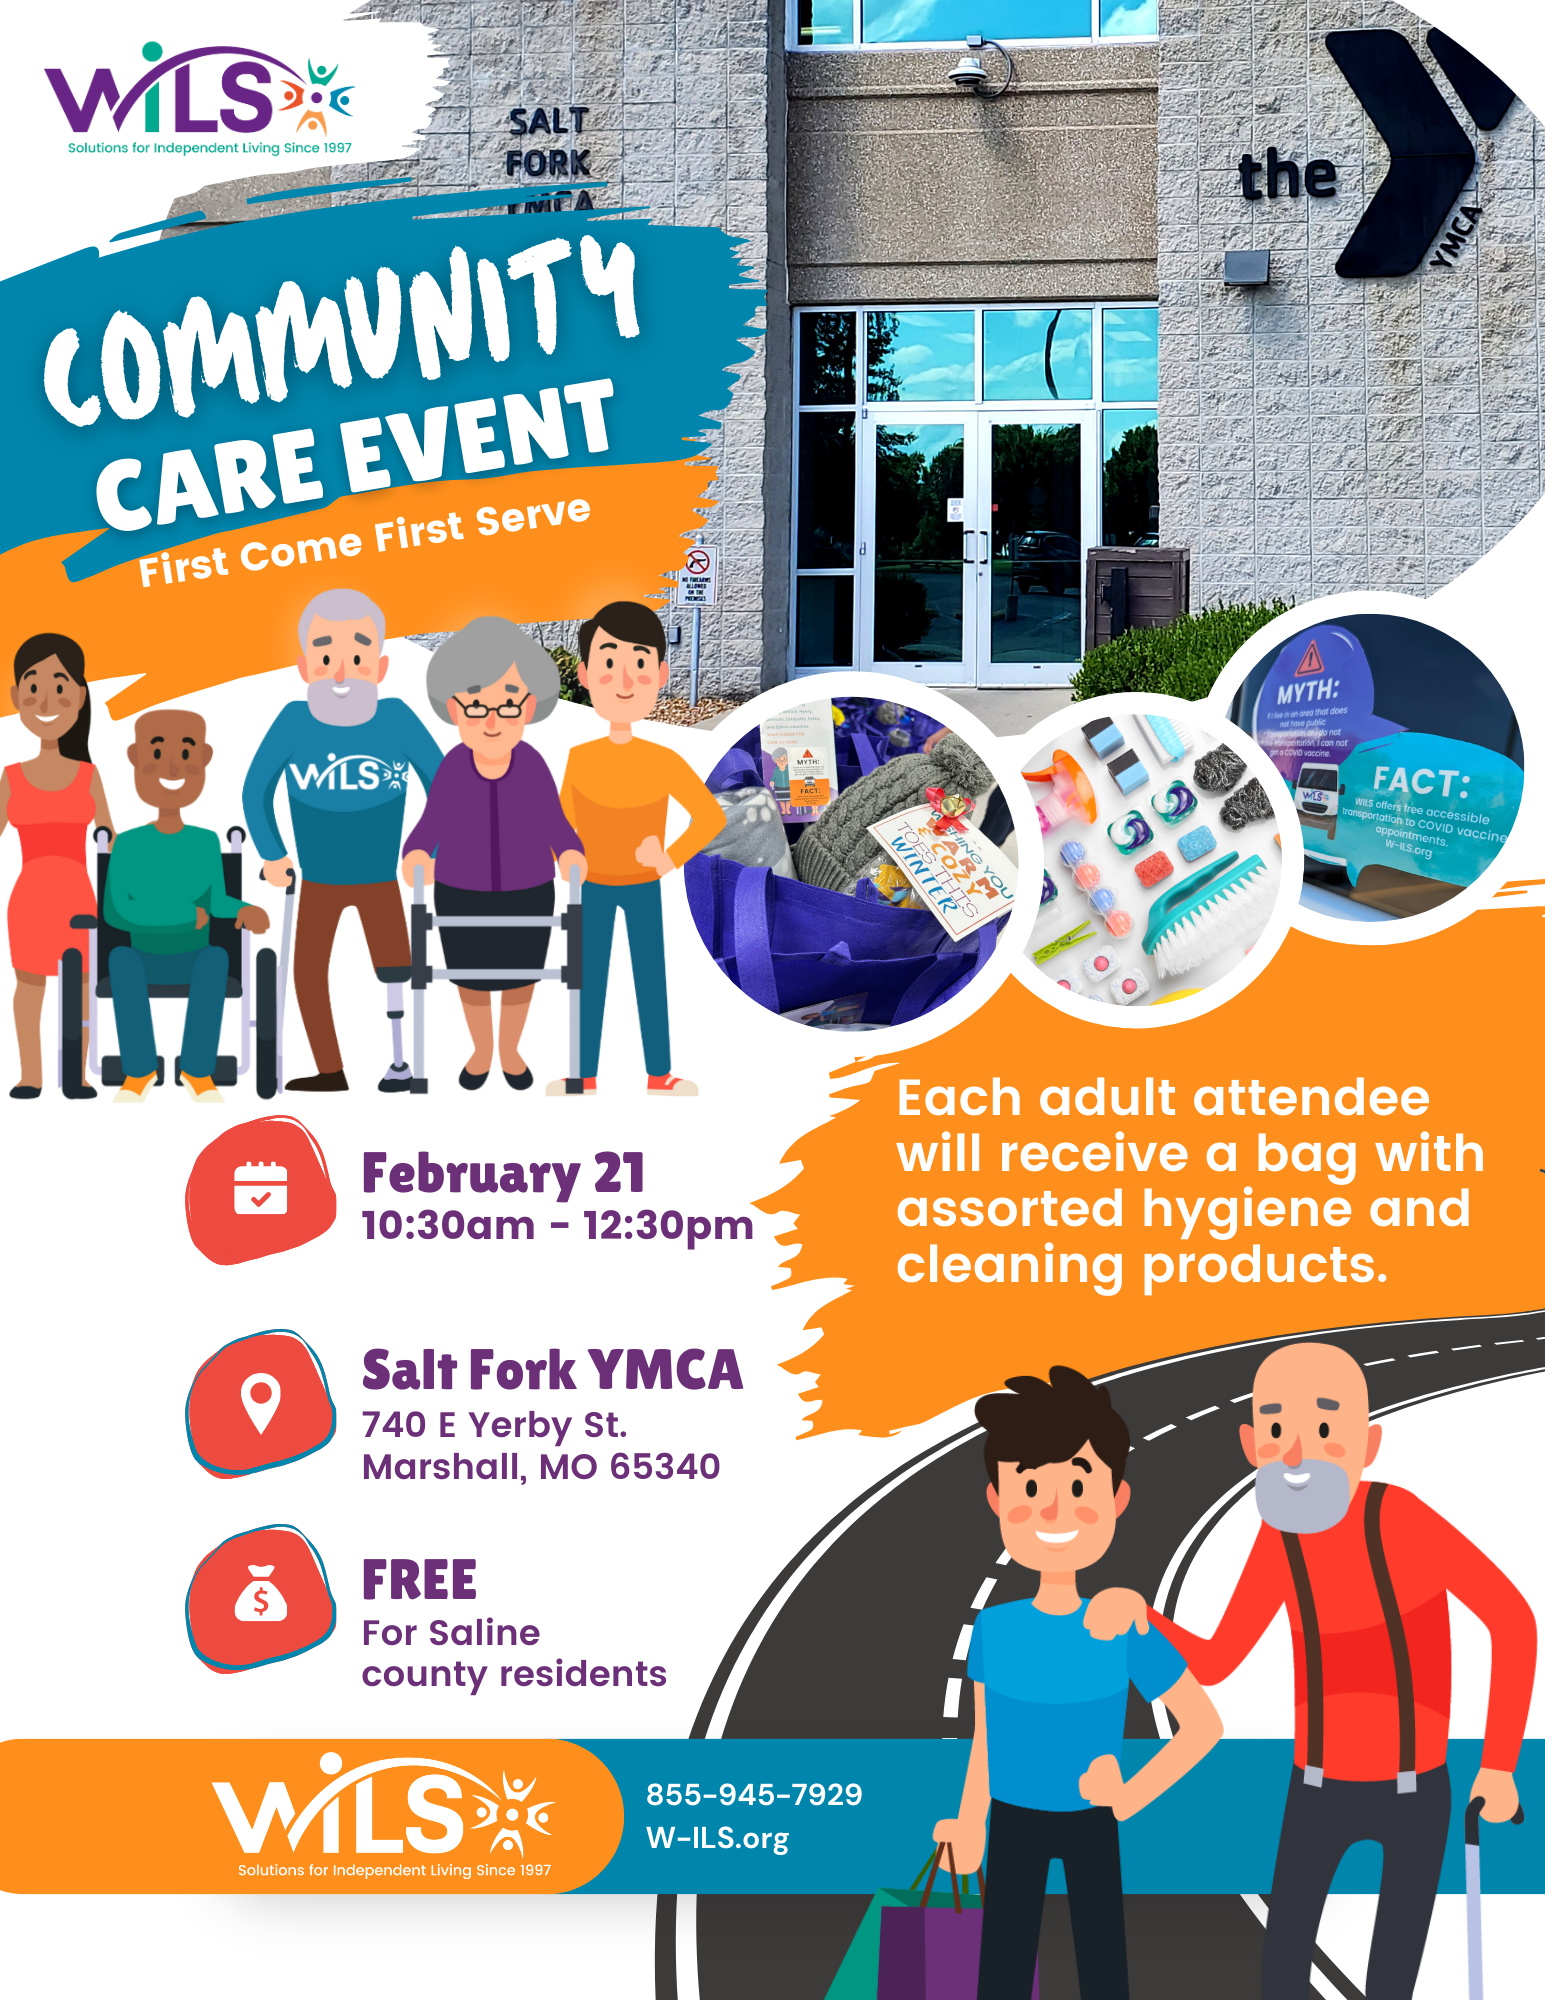 Free Community Care Event Feb 21 10:30am - 12:30pm Salt Fork YMCA 740 E. Yerby St. Marshall. MO 65340 For Saline county residents Each adult attendee will receive a bag with assorted hygiene and cleaning products. 855-945-7929 W-ILS.org 